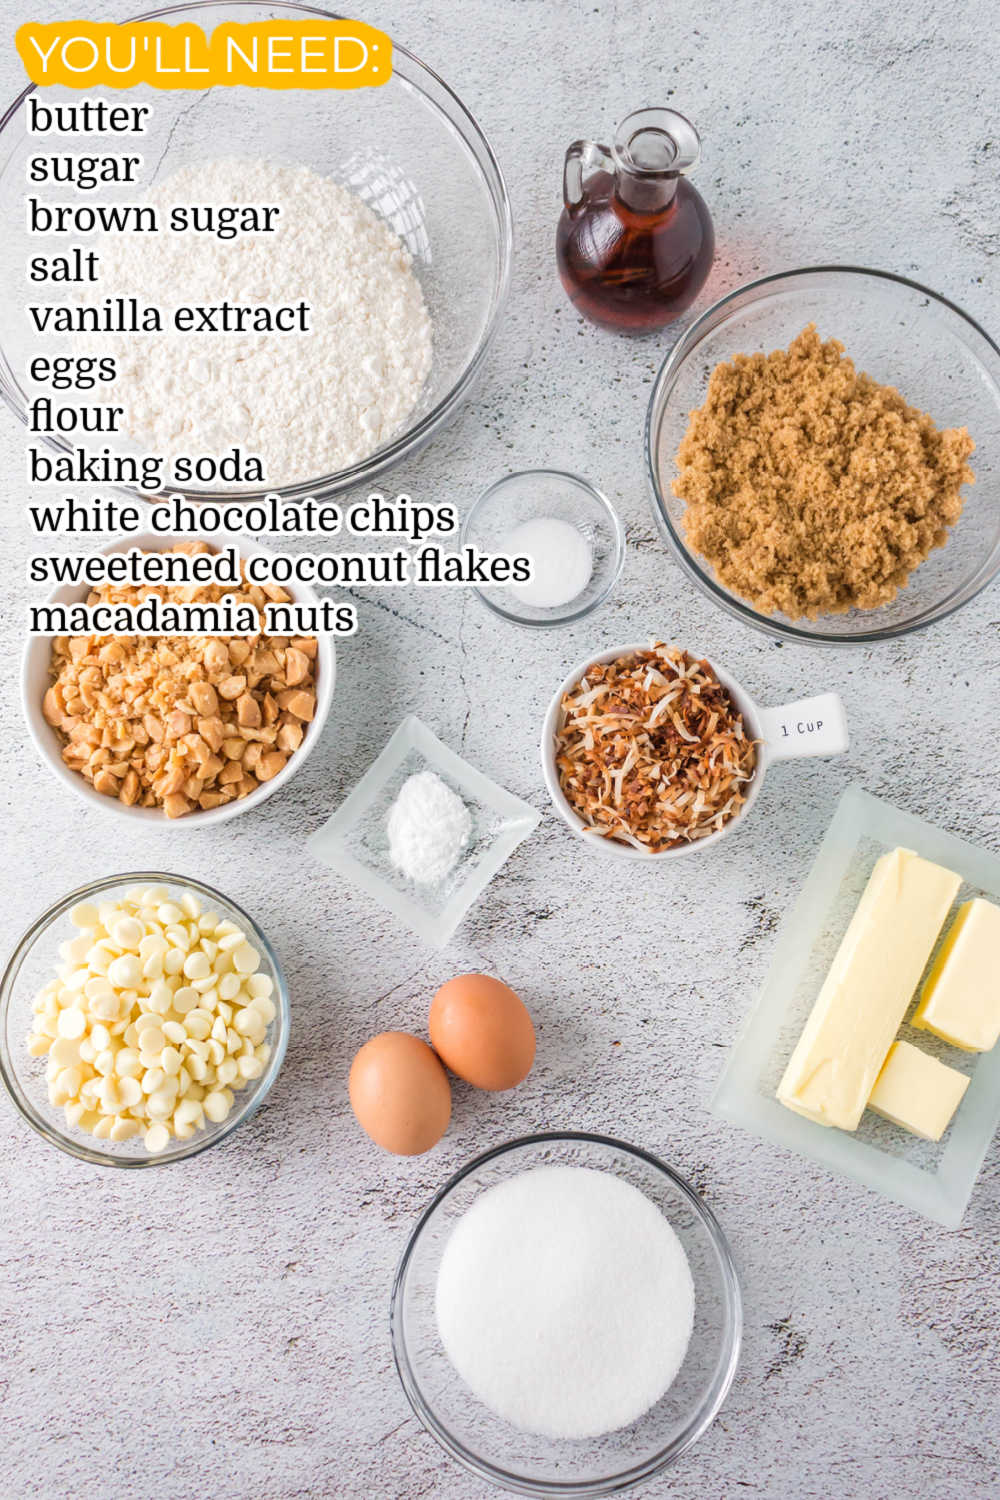 All of the ingredients needed to make this White Chocolate Blondie recipe.